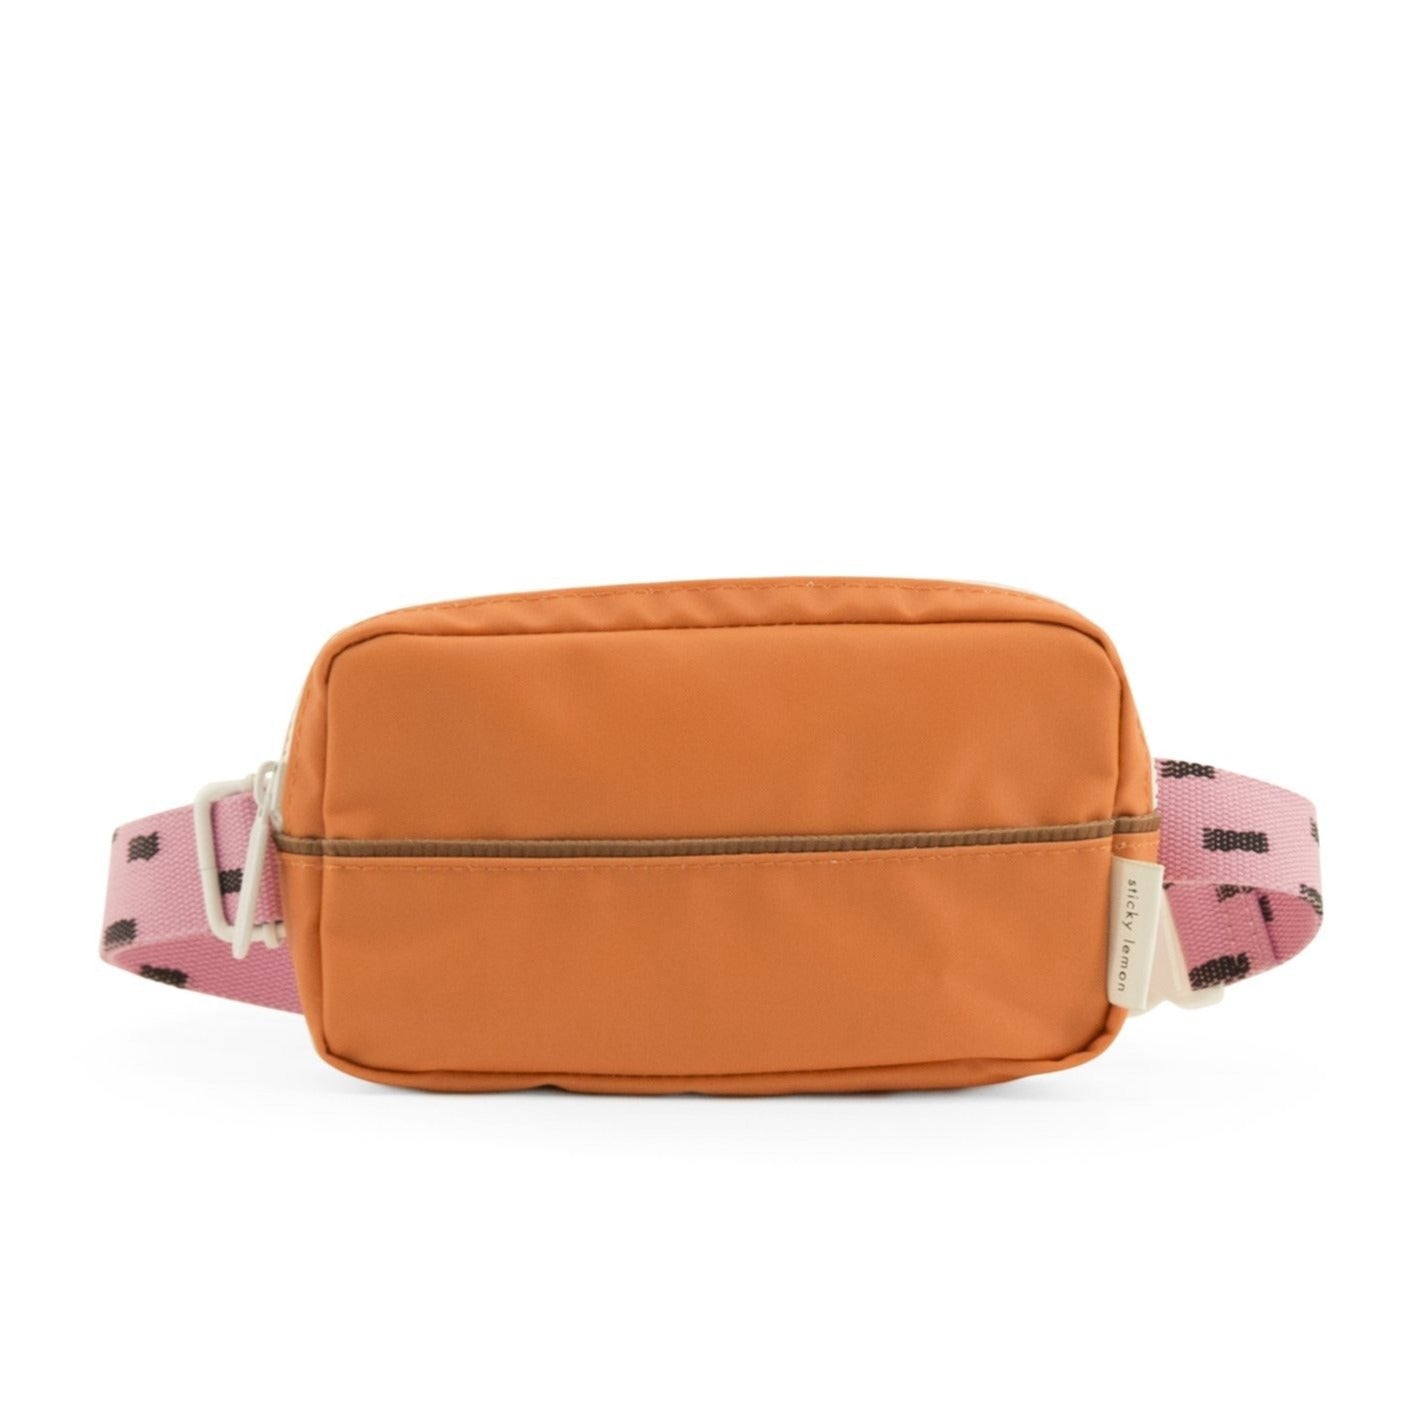 Sticky Lemon Farmhouse Fanny Pack Small, Flower Pink – Just Shoes